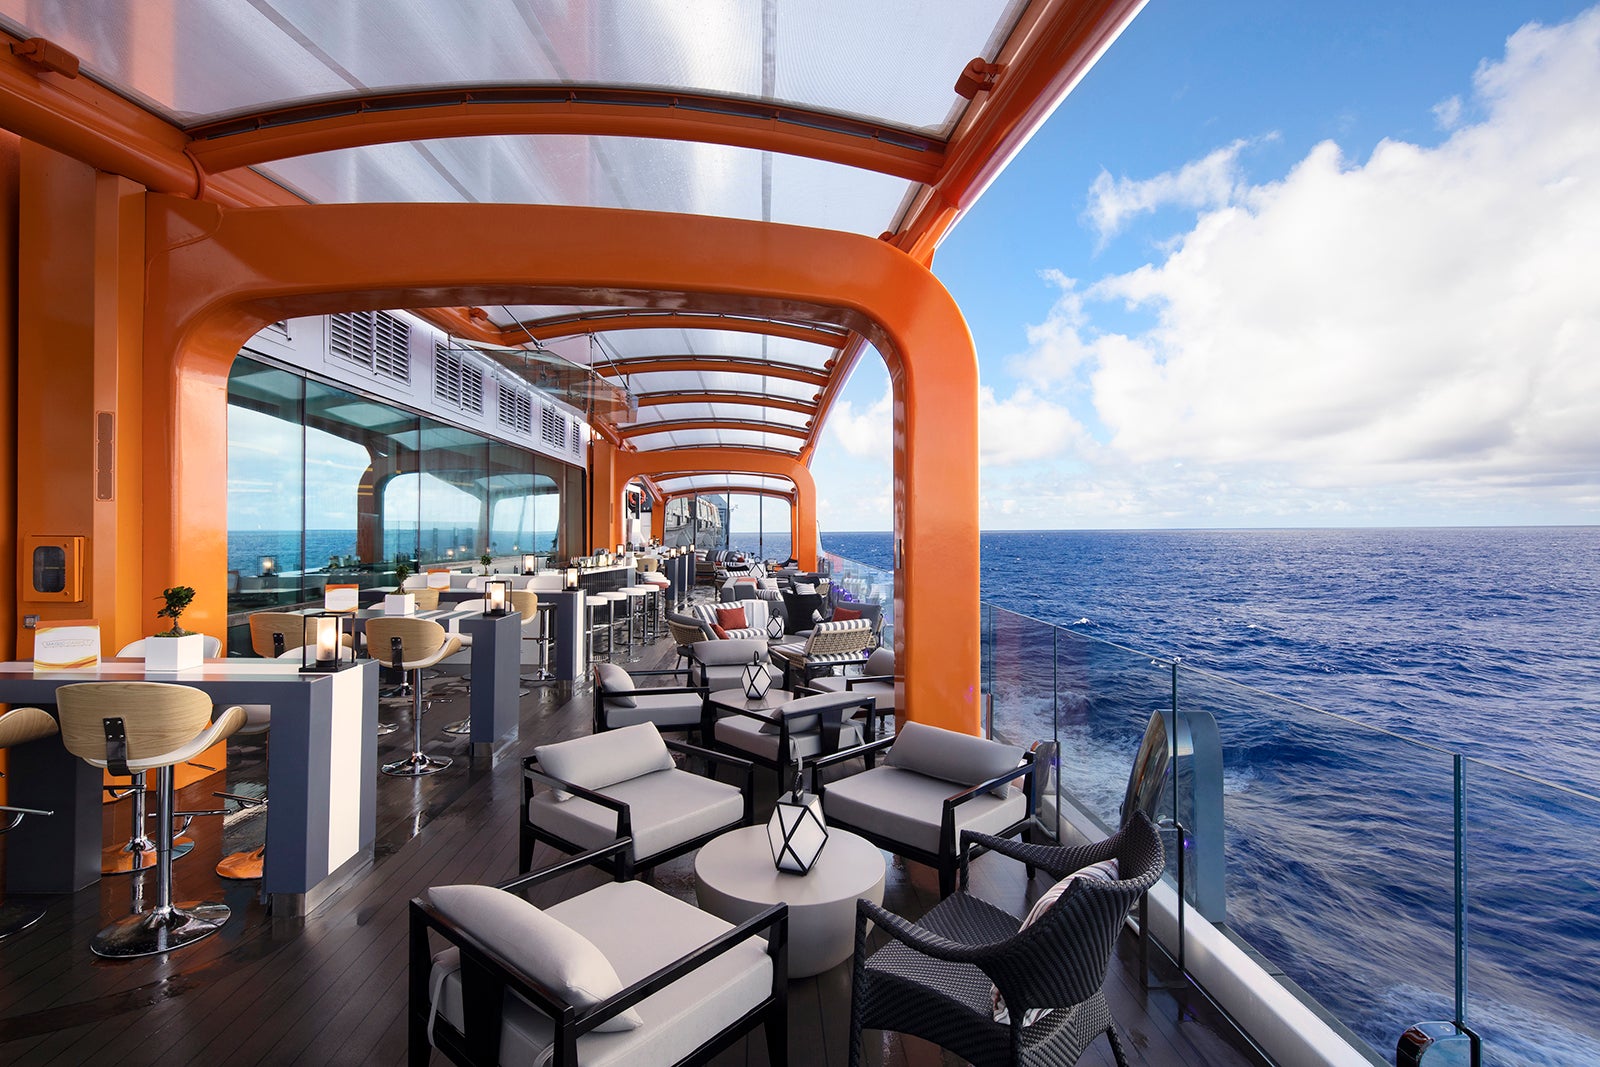 cruise food and drink packages